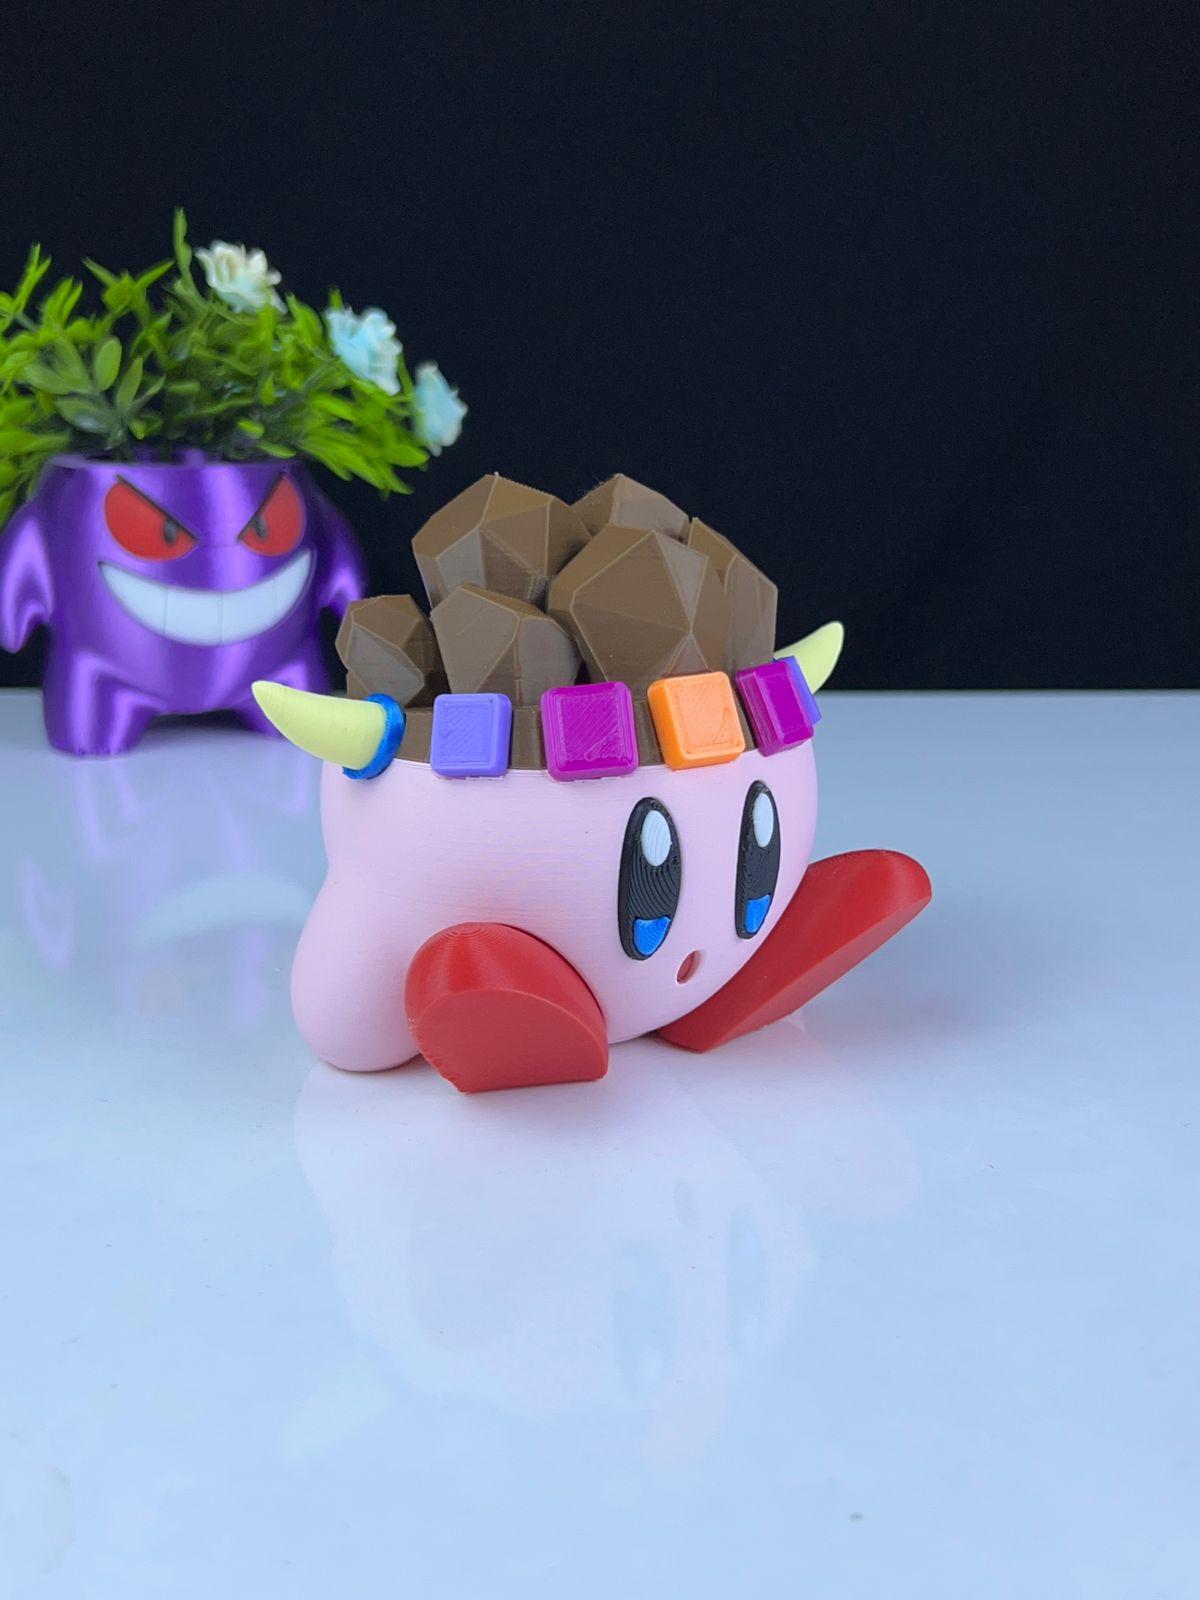 Stone Kirby - Multipart 3d model